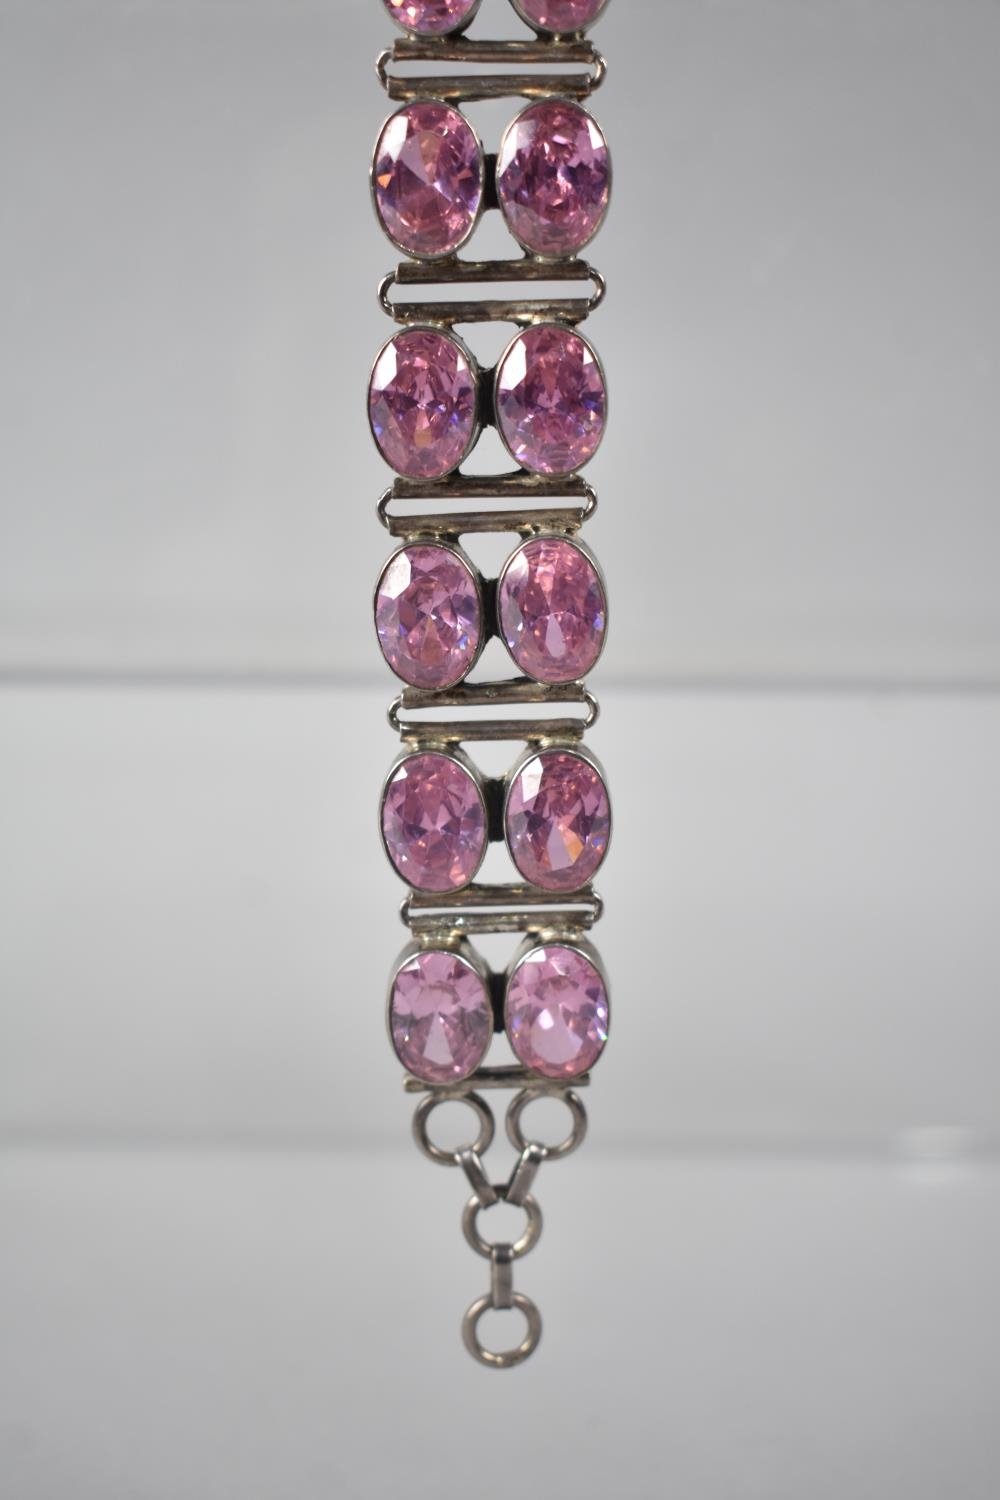 A Large and Heavy Silver and Jewelled Bracelet, Two Rows of Oval Mixed Cut Stones, 74.6gms - Image 2 of 3